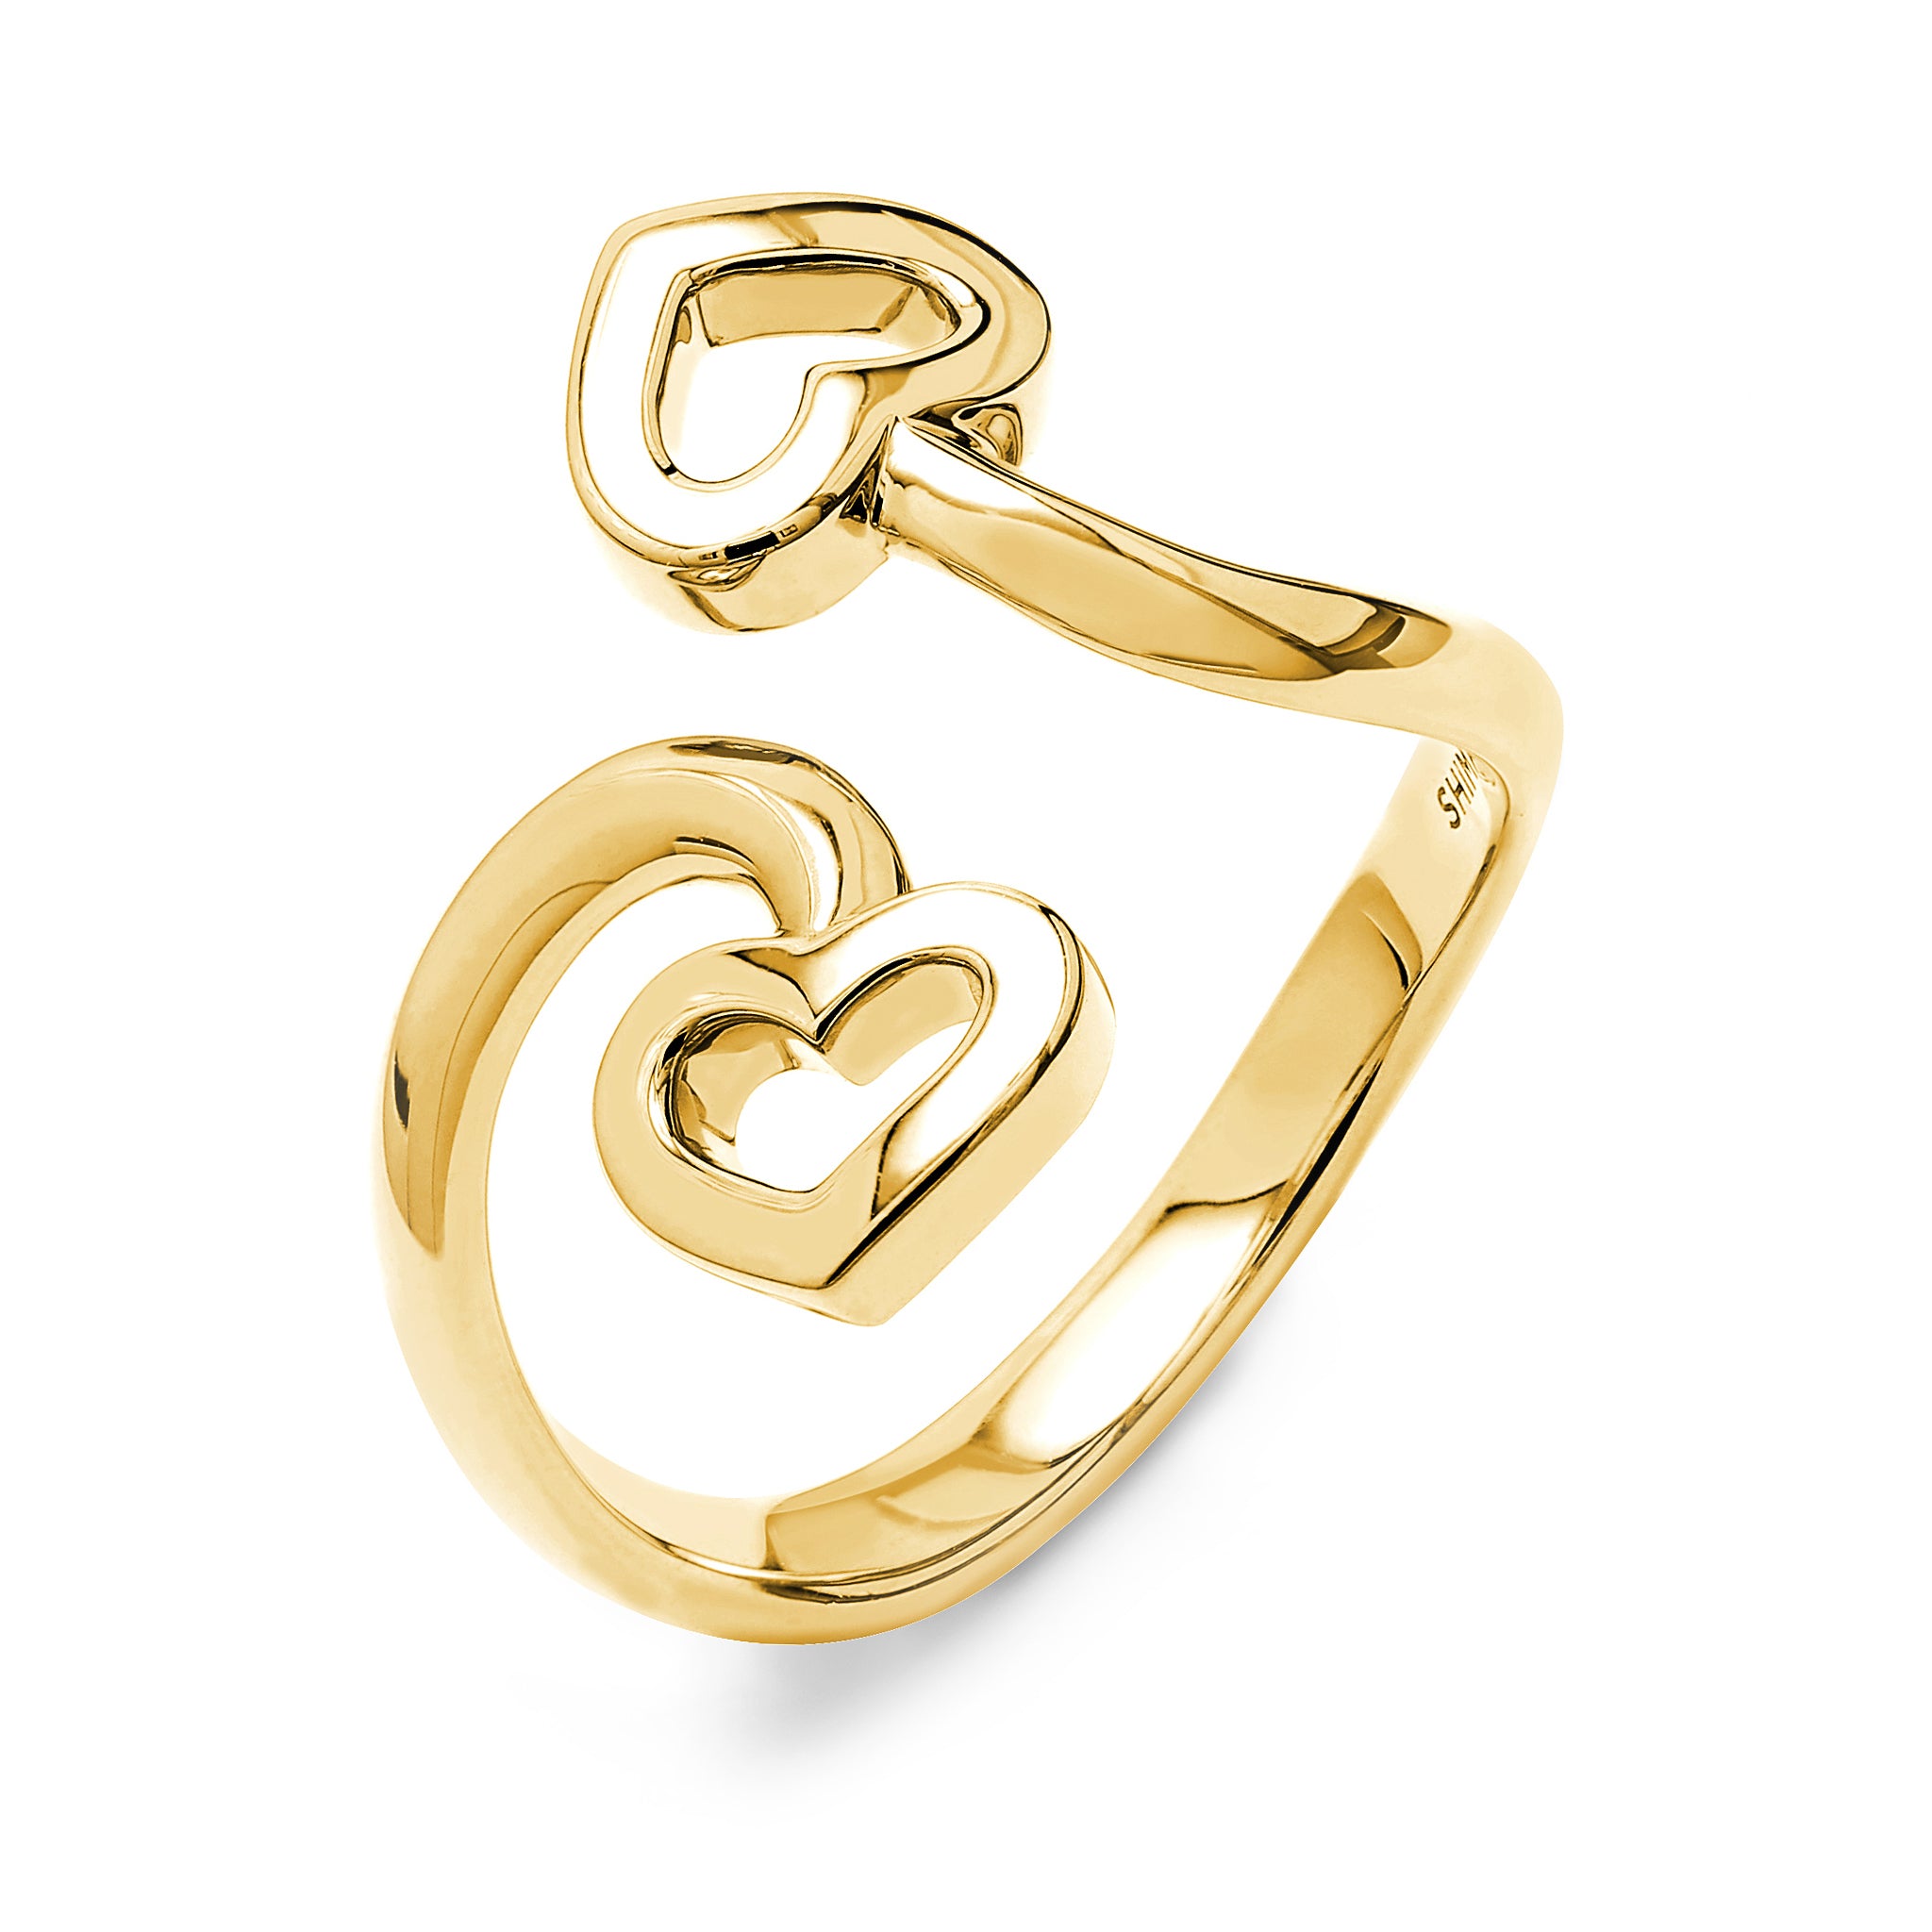 Shimansky - Two Hearts Twist Ring Crafted in 18K Yellow Gold